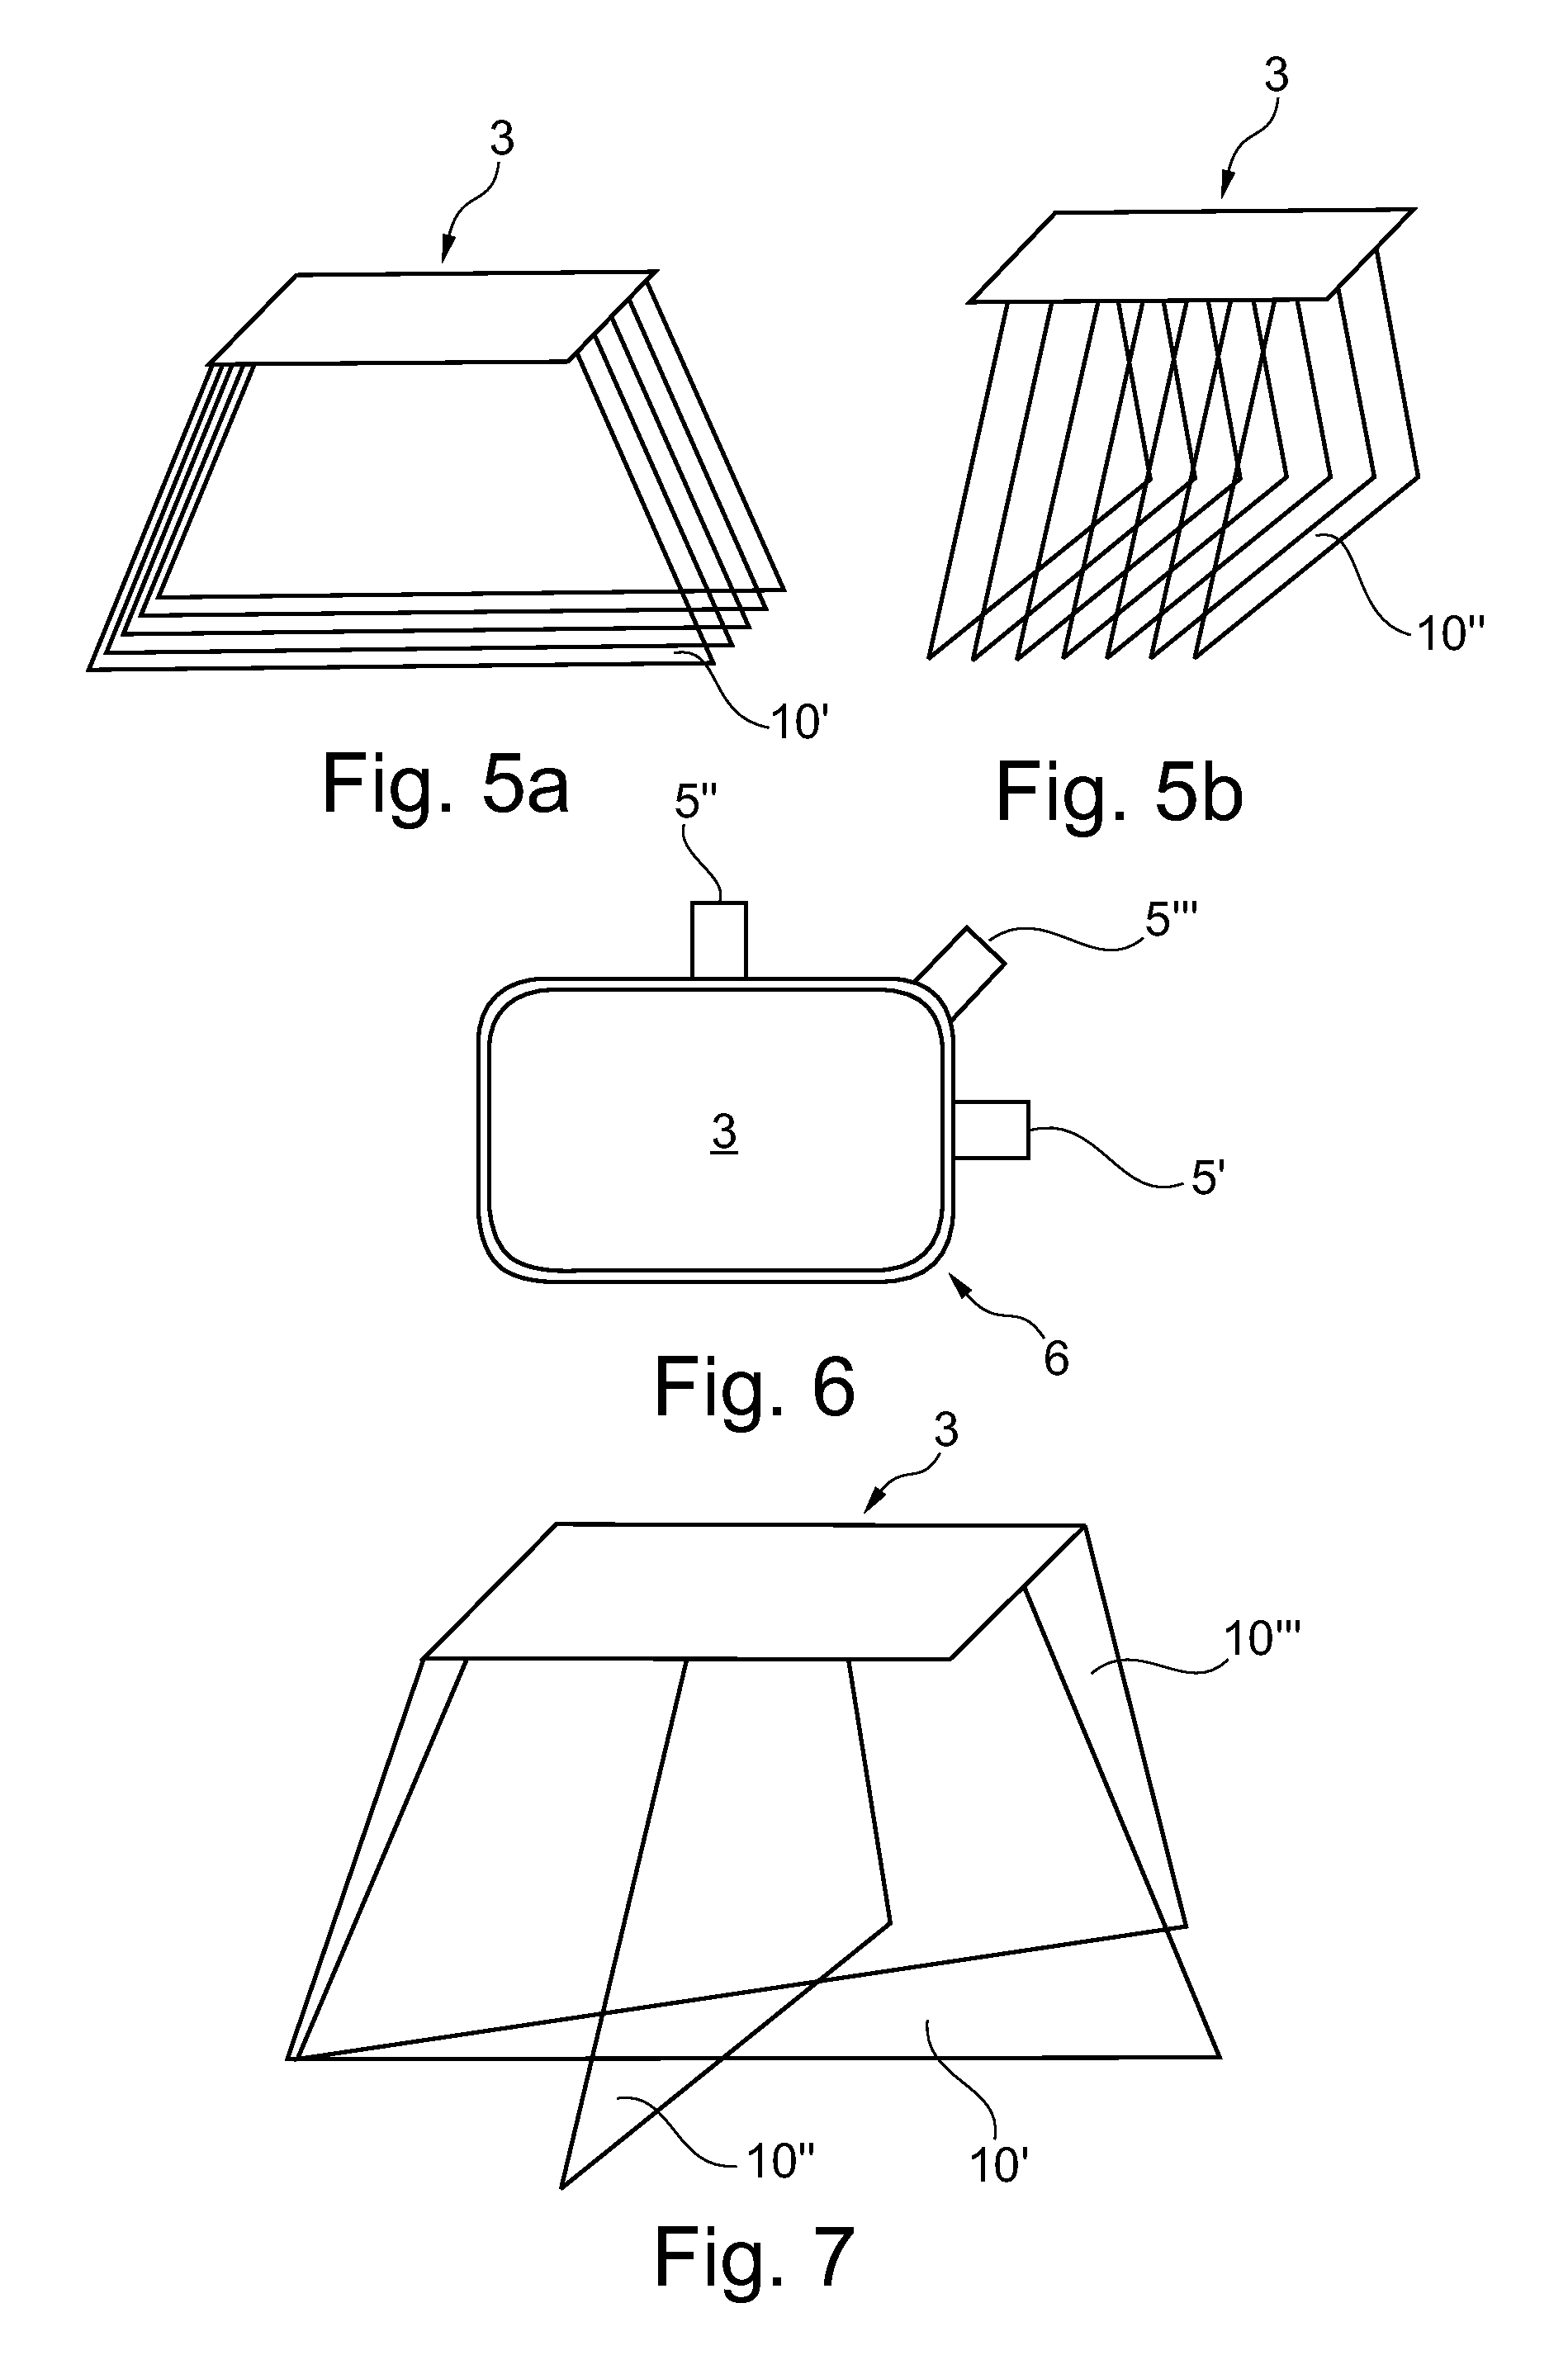 Biopsy guide system with an ultrasound transducer and method of using same